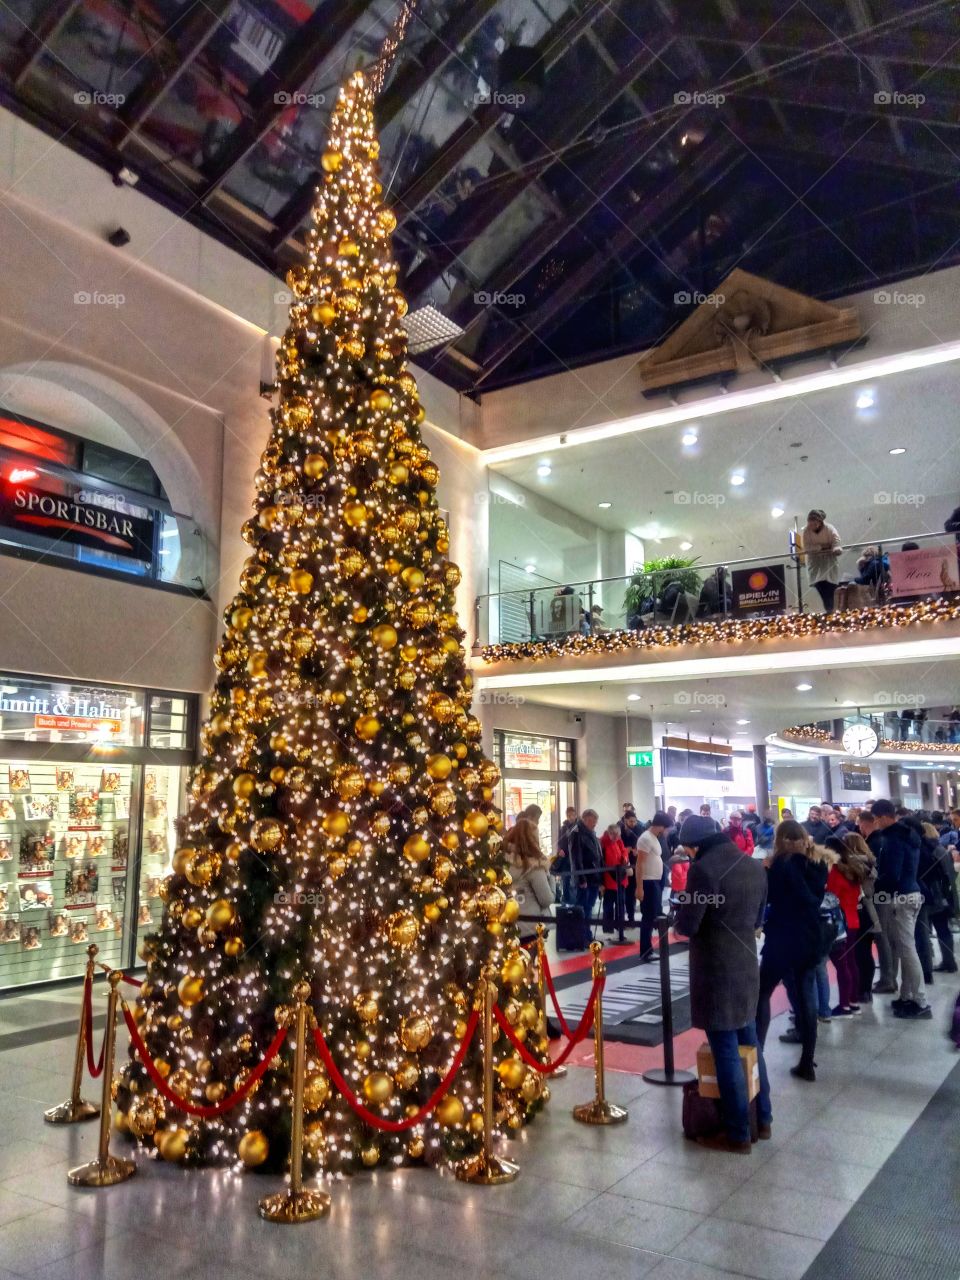 A big Christmas Tree with many decorations and a group of people standing around it